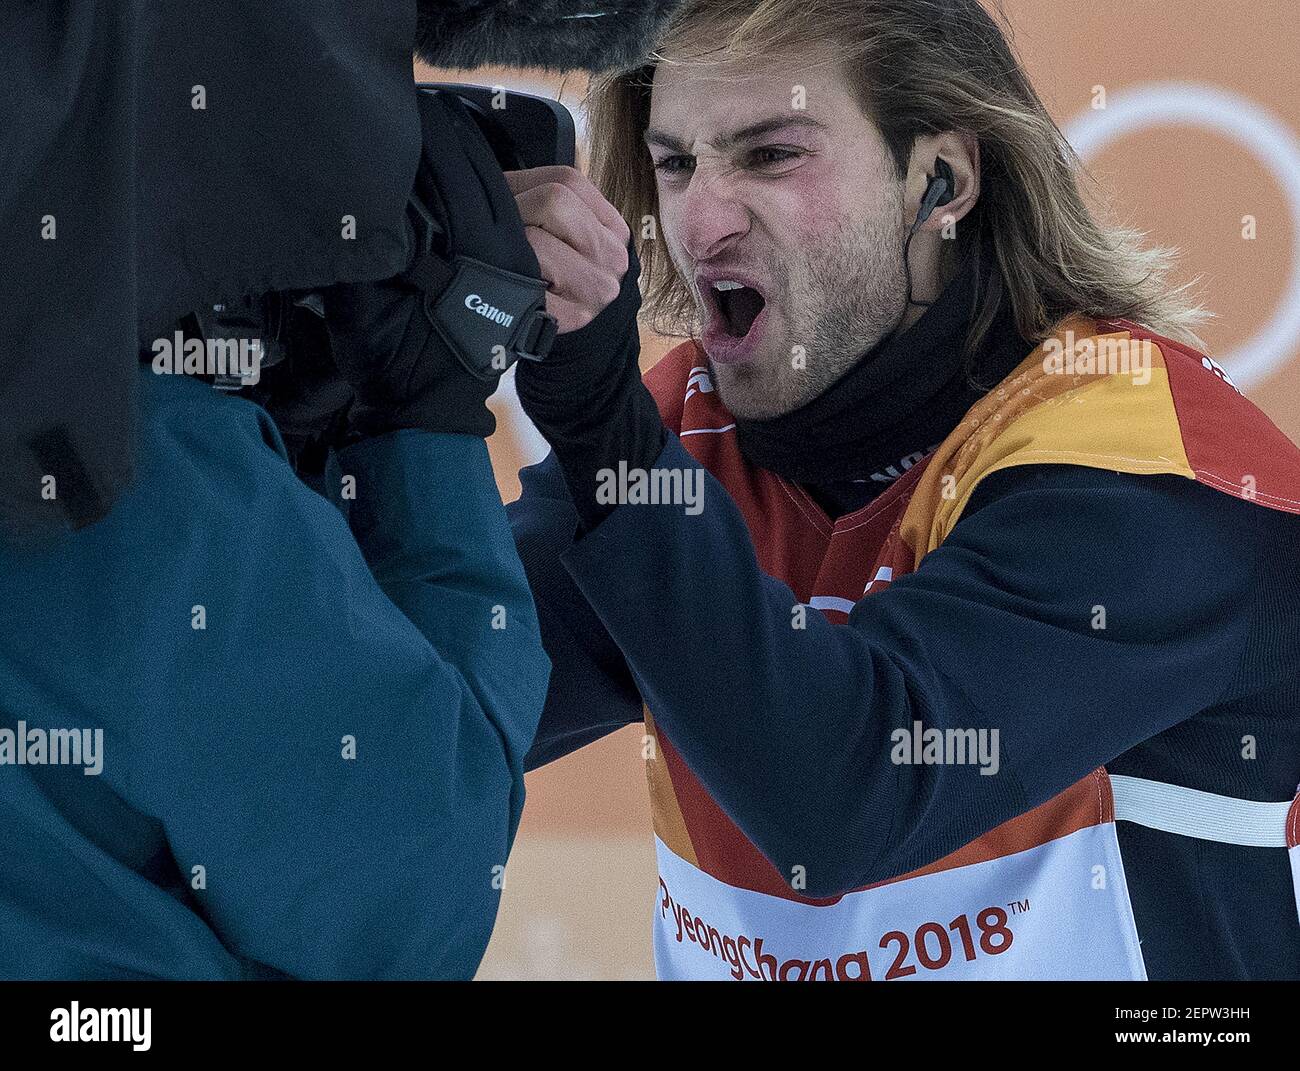 Patrick Burgener reacts to the camera after a run in the Men's Half Pipe Snowboard finals at Phoenix Park in South Korea on Wednesday, Feb. 14, 2018, during the Pyeongchang Winter Olympics. (Photo by Carlos Gonzalez/Minneapolis Star Tribune/TNS/Sipa USA) Stock Photo